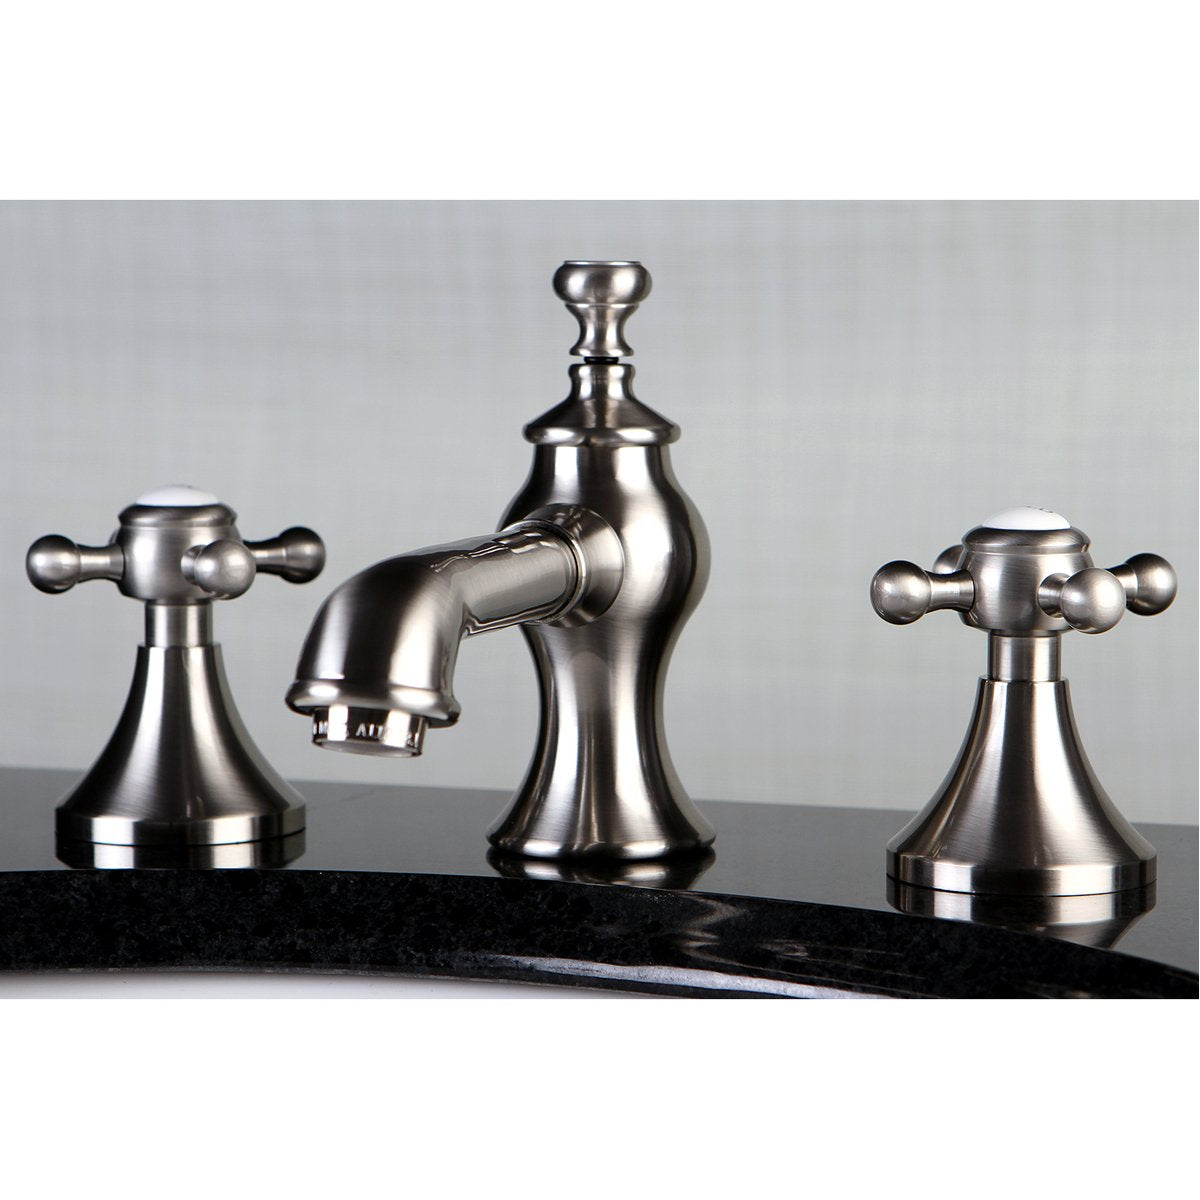 Kingston Brass English Country 8" Widespread Bathroom Faucet